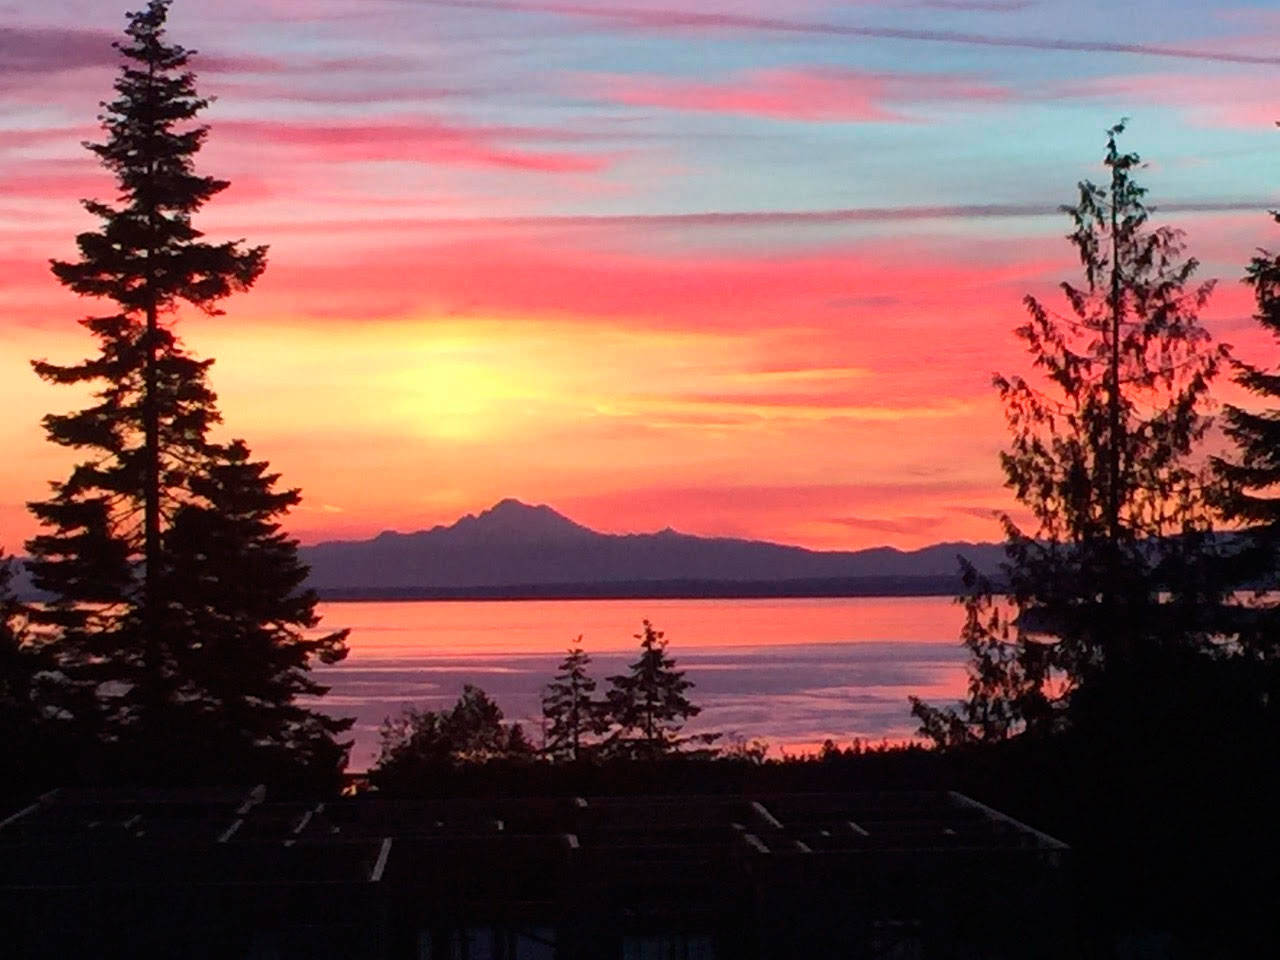 Contributor Kathryn Haskell caught this scene recently from her Sequim home. “I took this shot instinctively when our cat, Bruce, woke me at 4:26 a.m. … we call our house ‘Dreamland’ and I think this describes perfectly the picture of this magnificent sun rise,” she wrote.